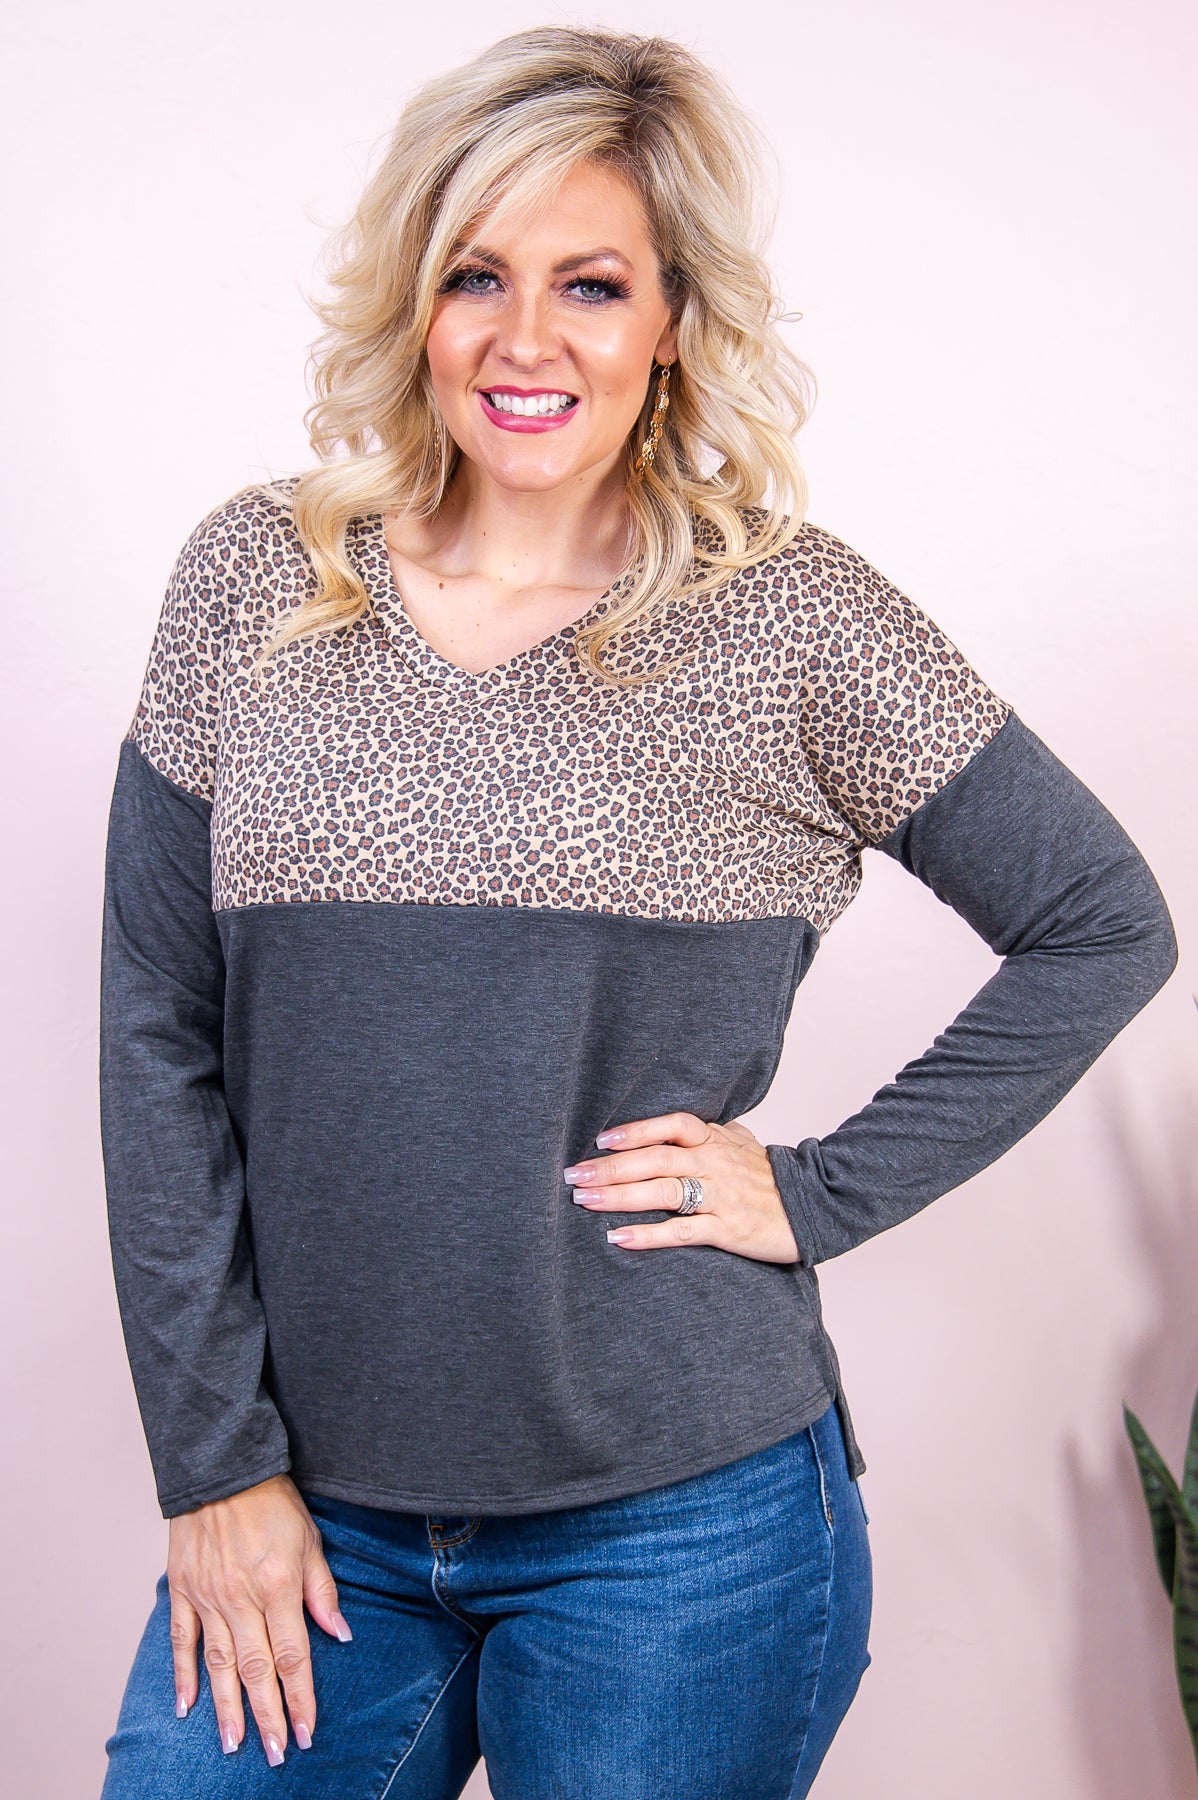 Snow Covered Hills Charcoal/Taupe Printed Top - T8163CH